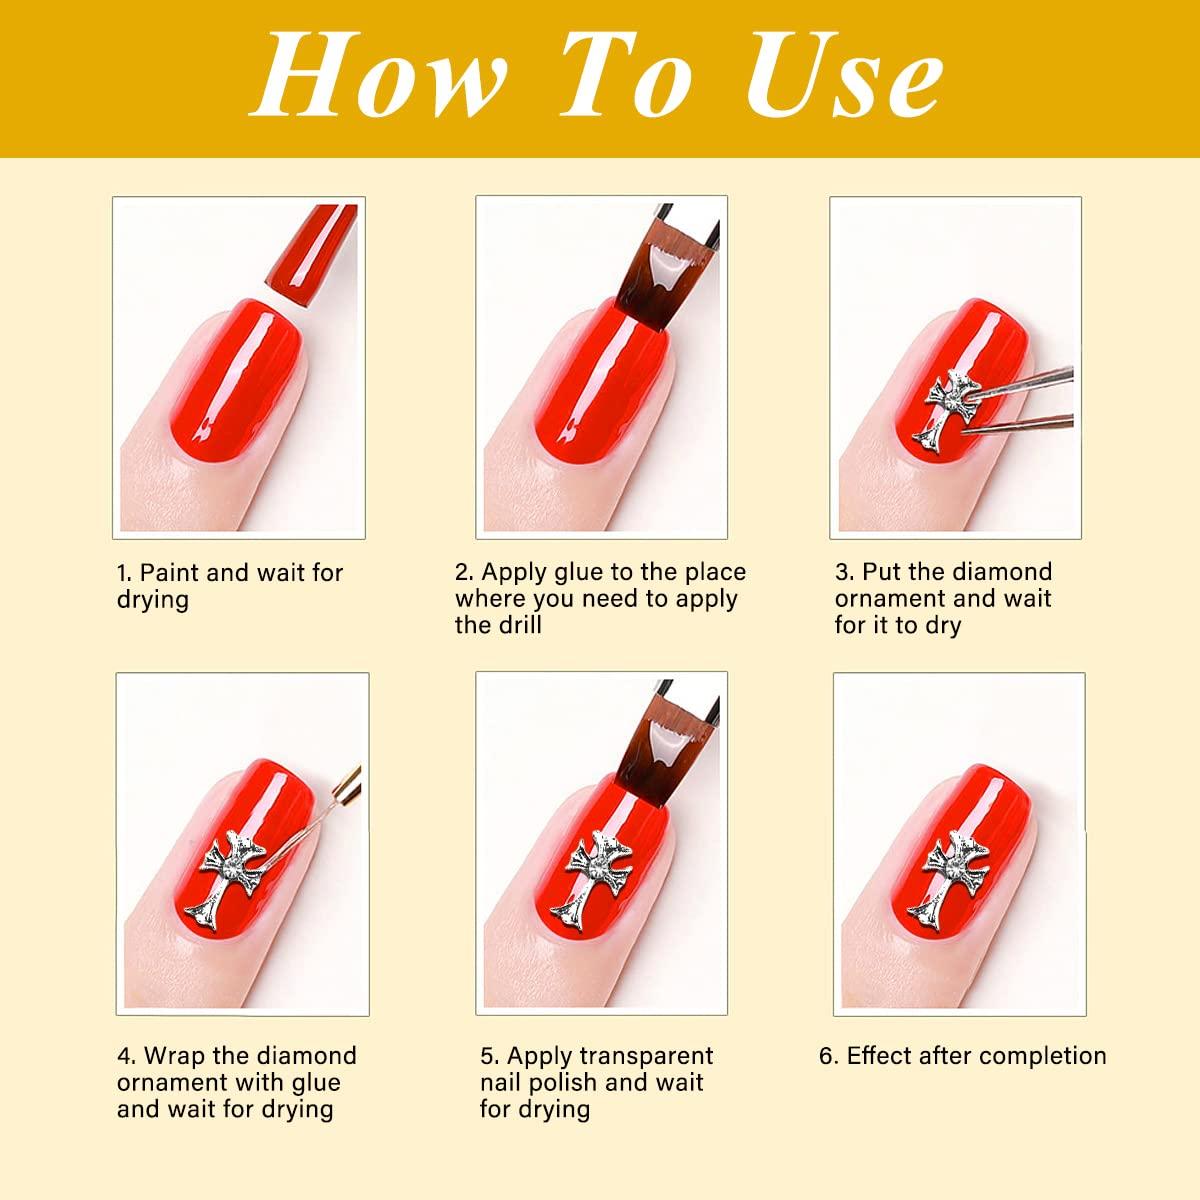 What Are Some Nail Essentials Used for Nail Art? | by Wowbaonails | Medium